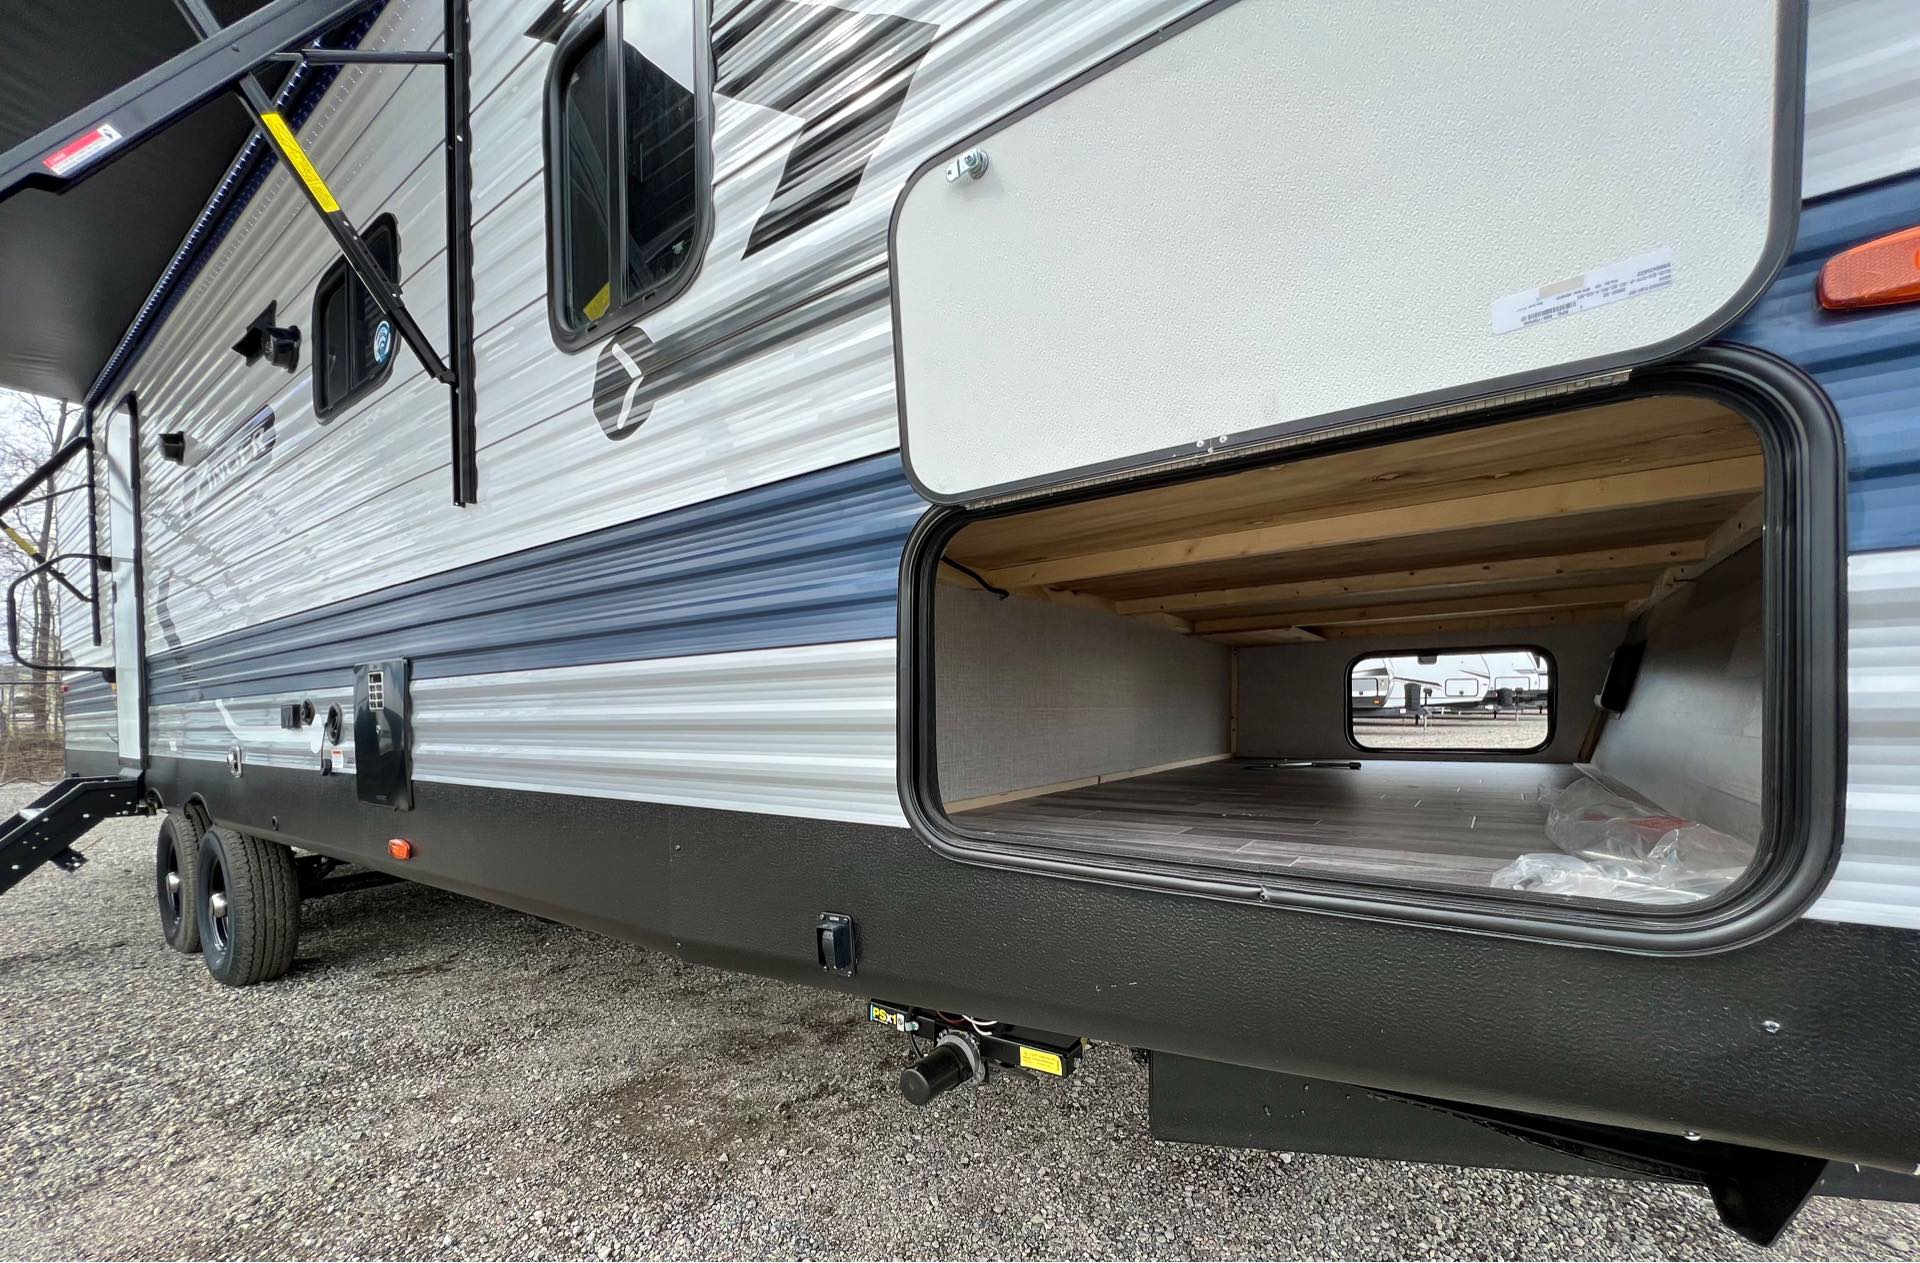 2022 CrossRoads Zinger ZR280RB at Lee's Country RV